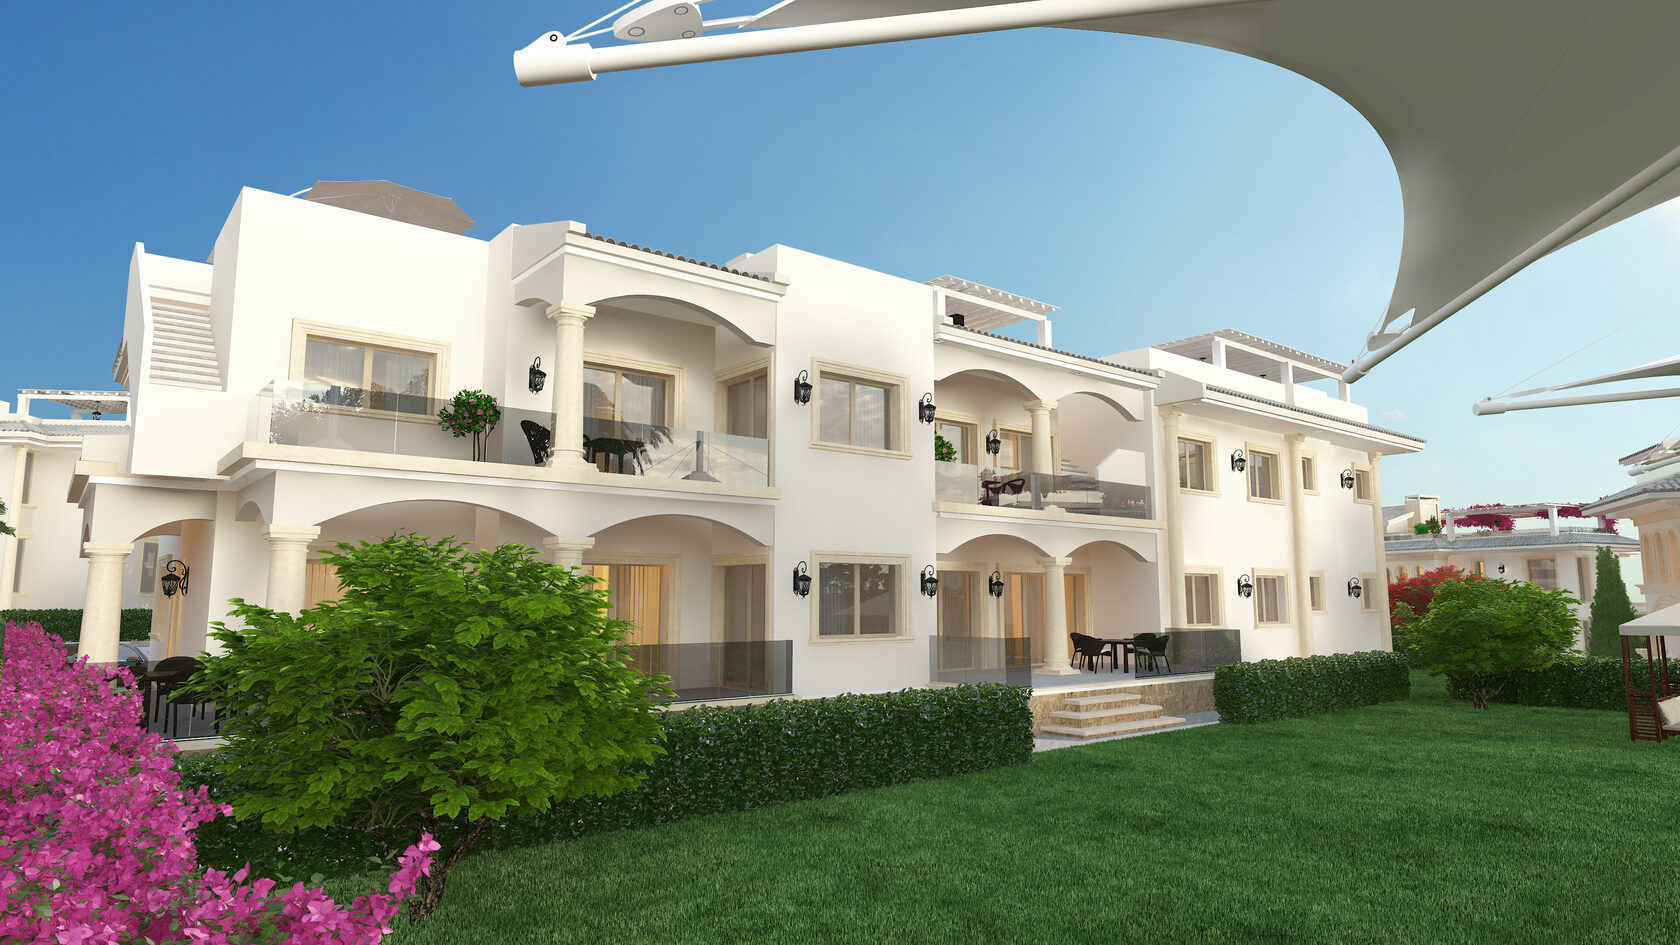 Northern Cyprus Real Estate Projects